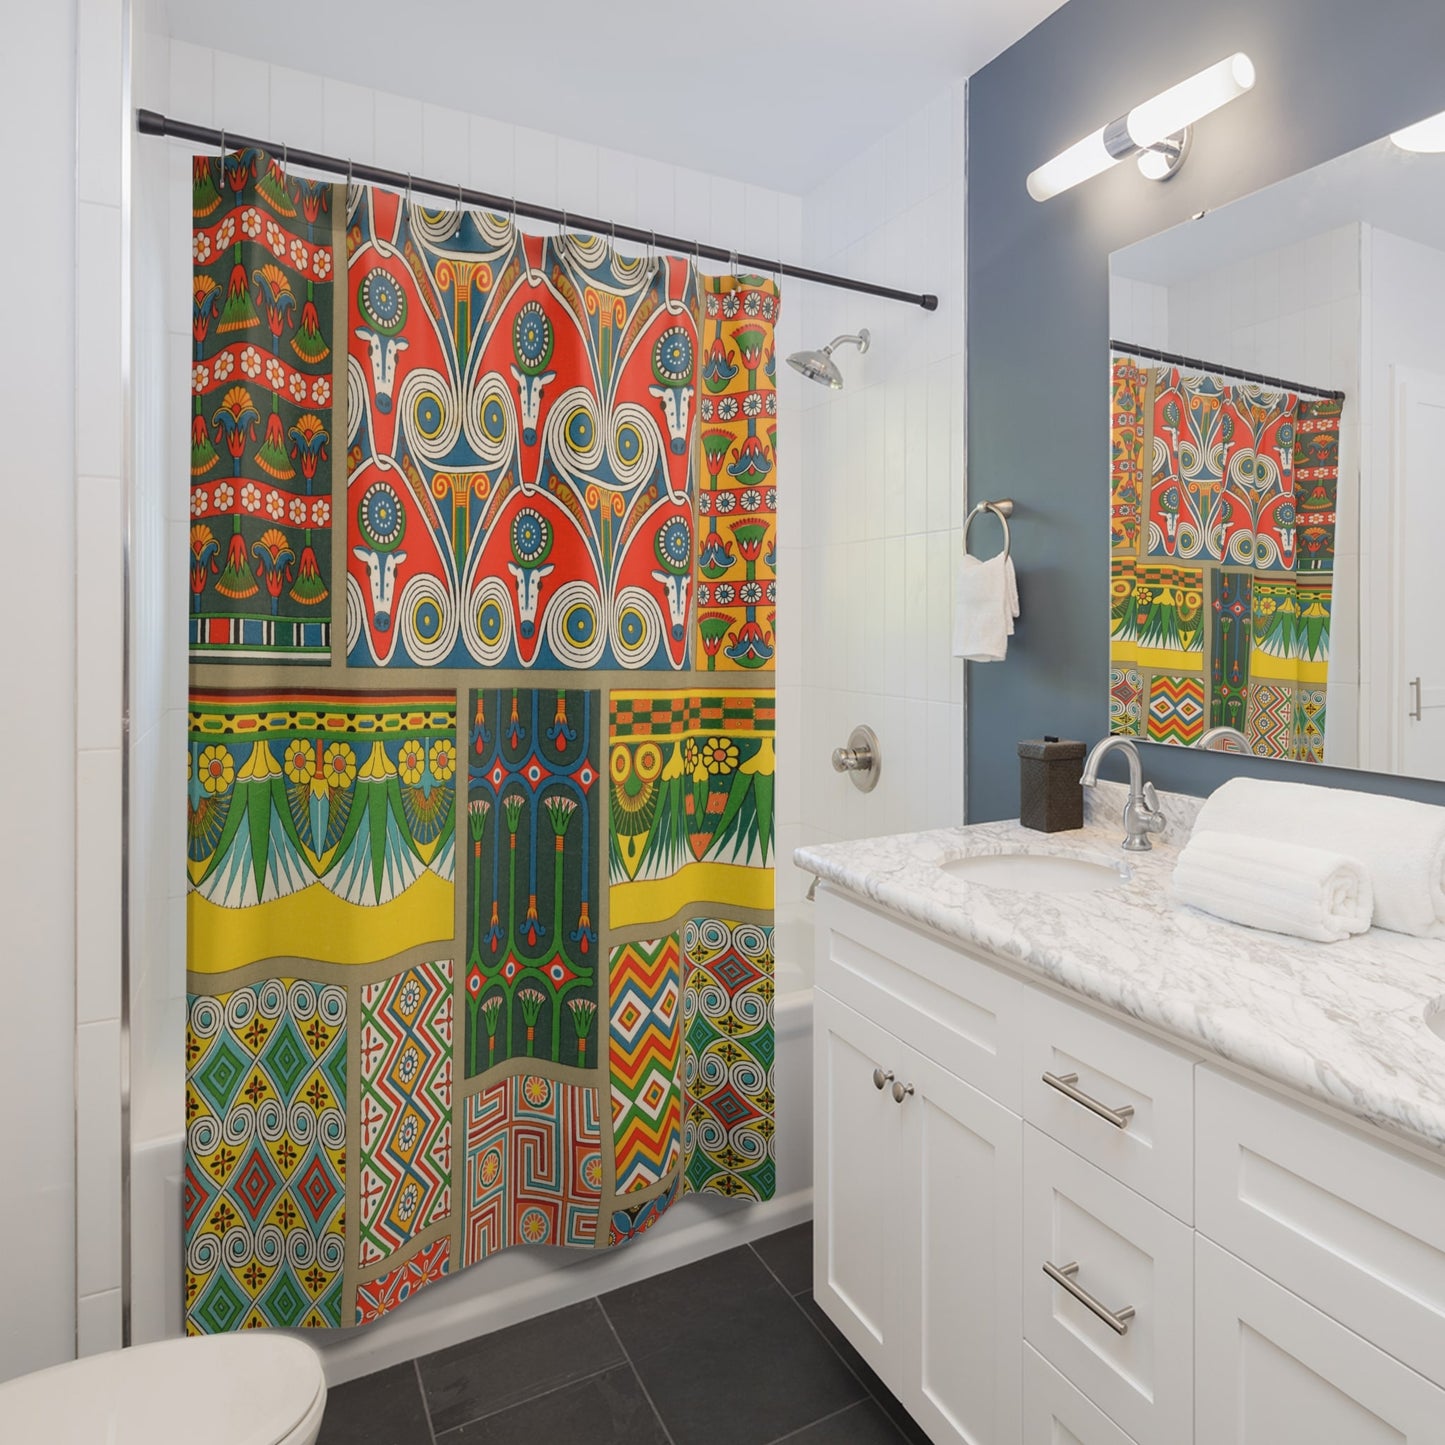 Unique Designs Shower Curtain Best Bathroom Decorating Ideas for Abstract Decor